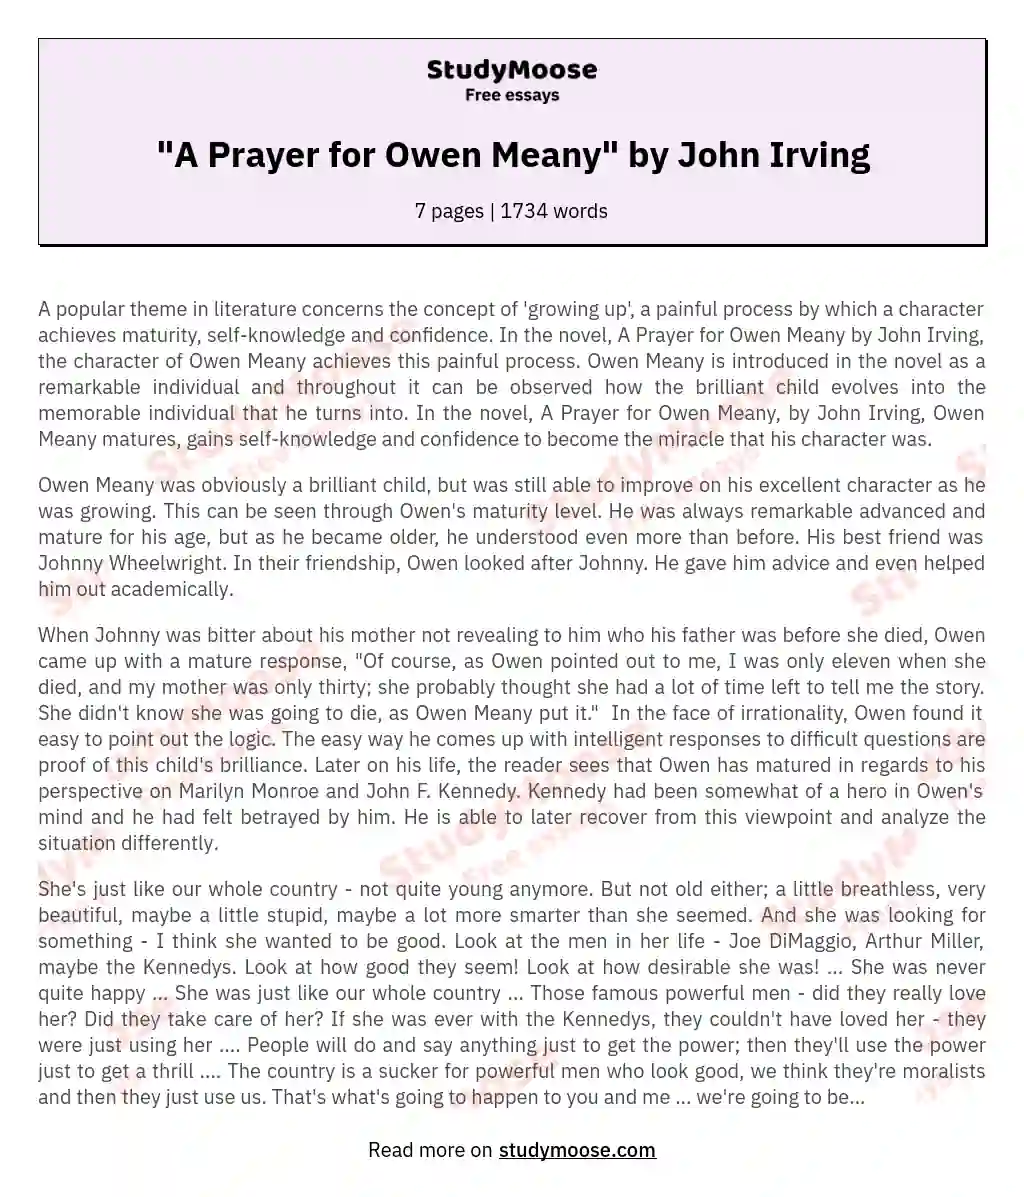 "A Prayer for Owen Meany" by John Irving